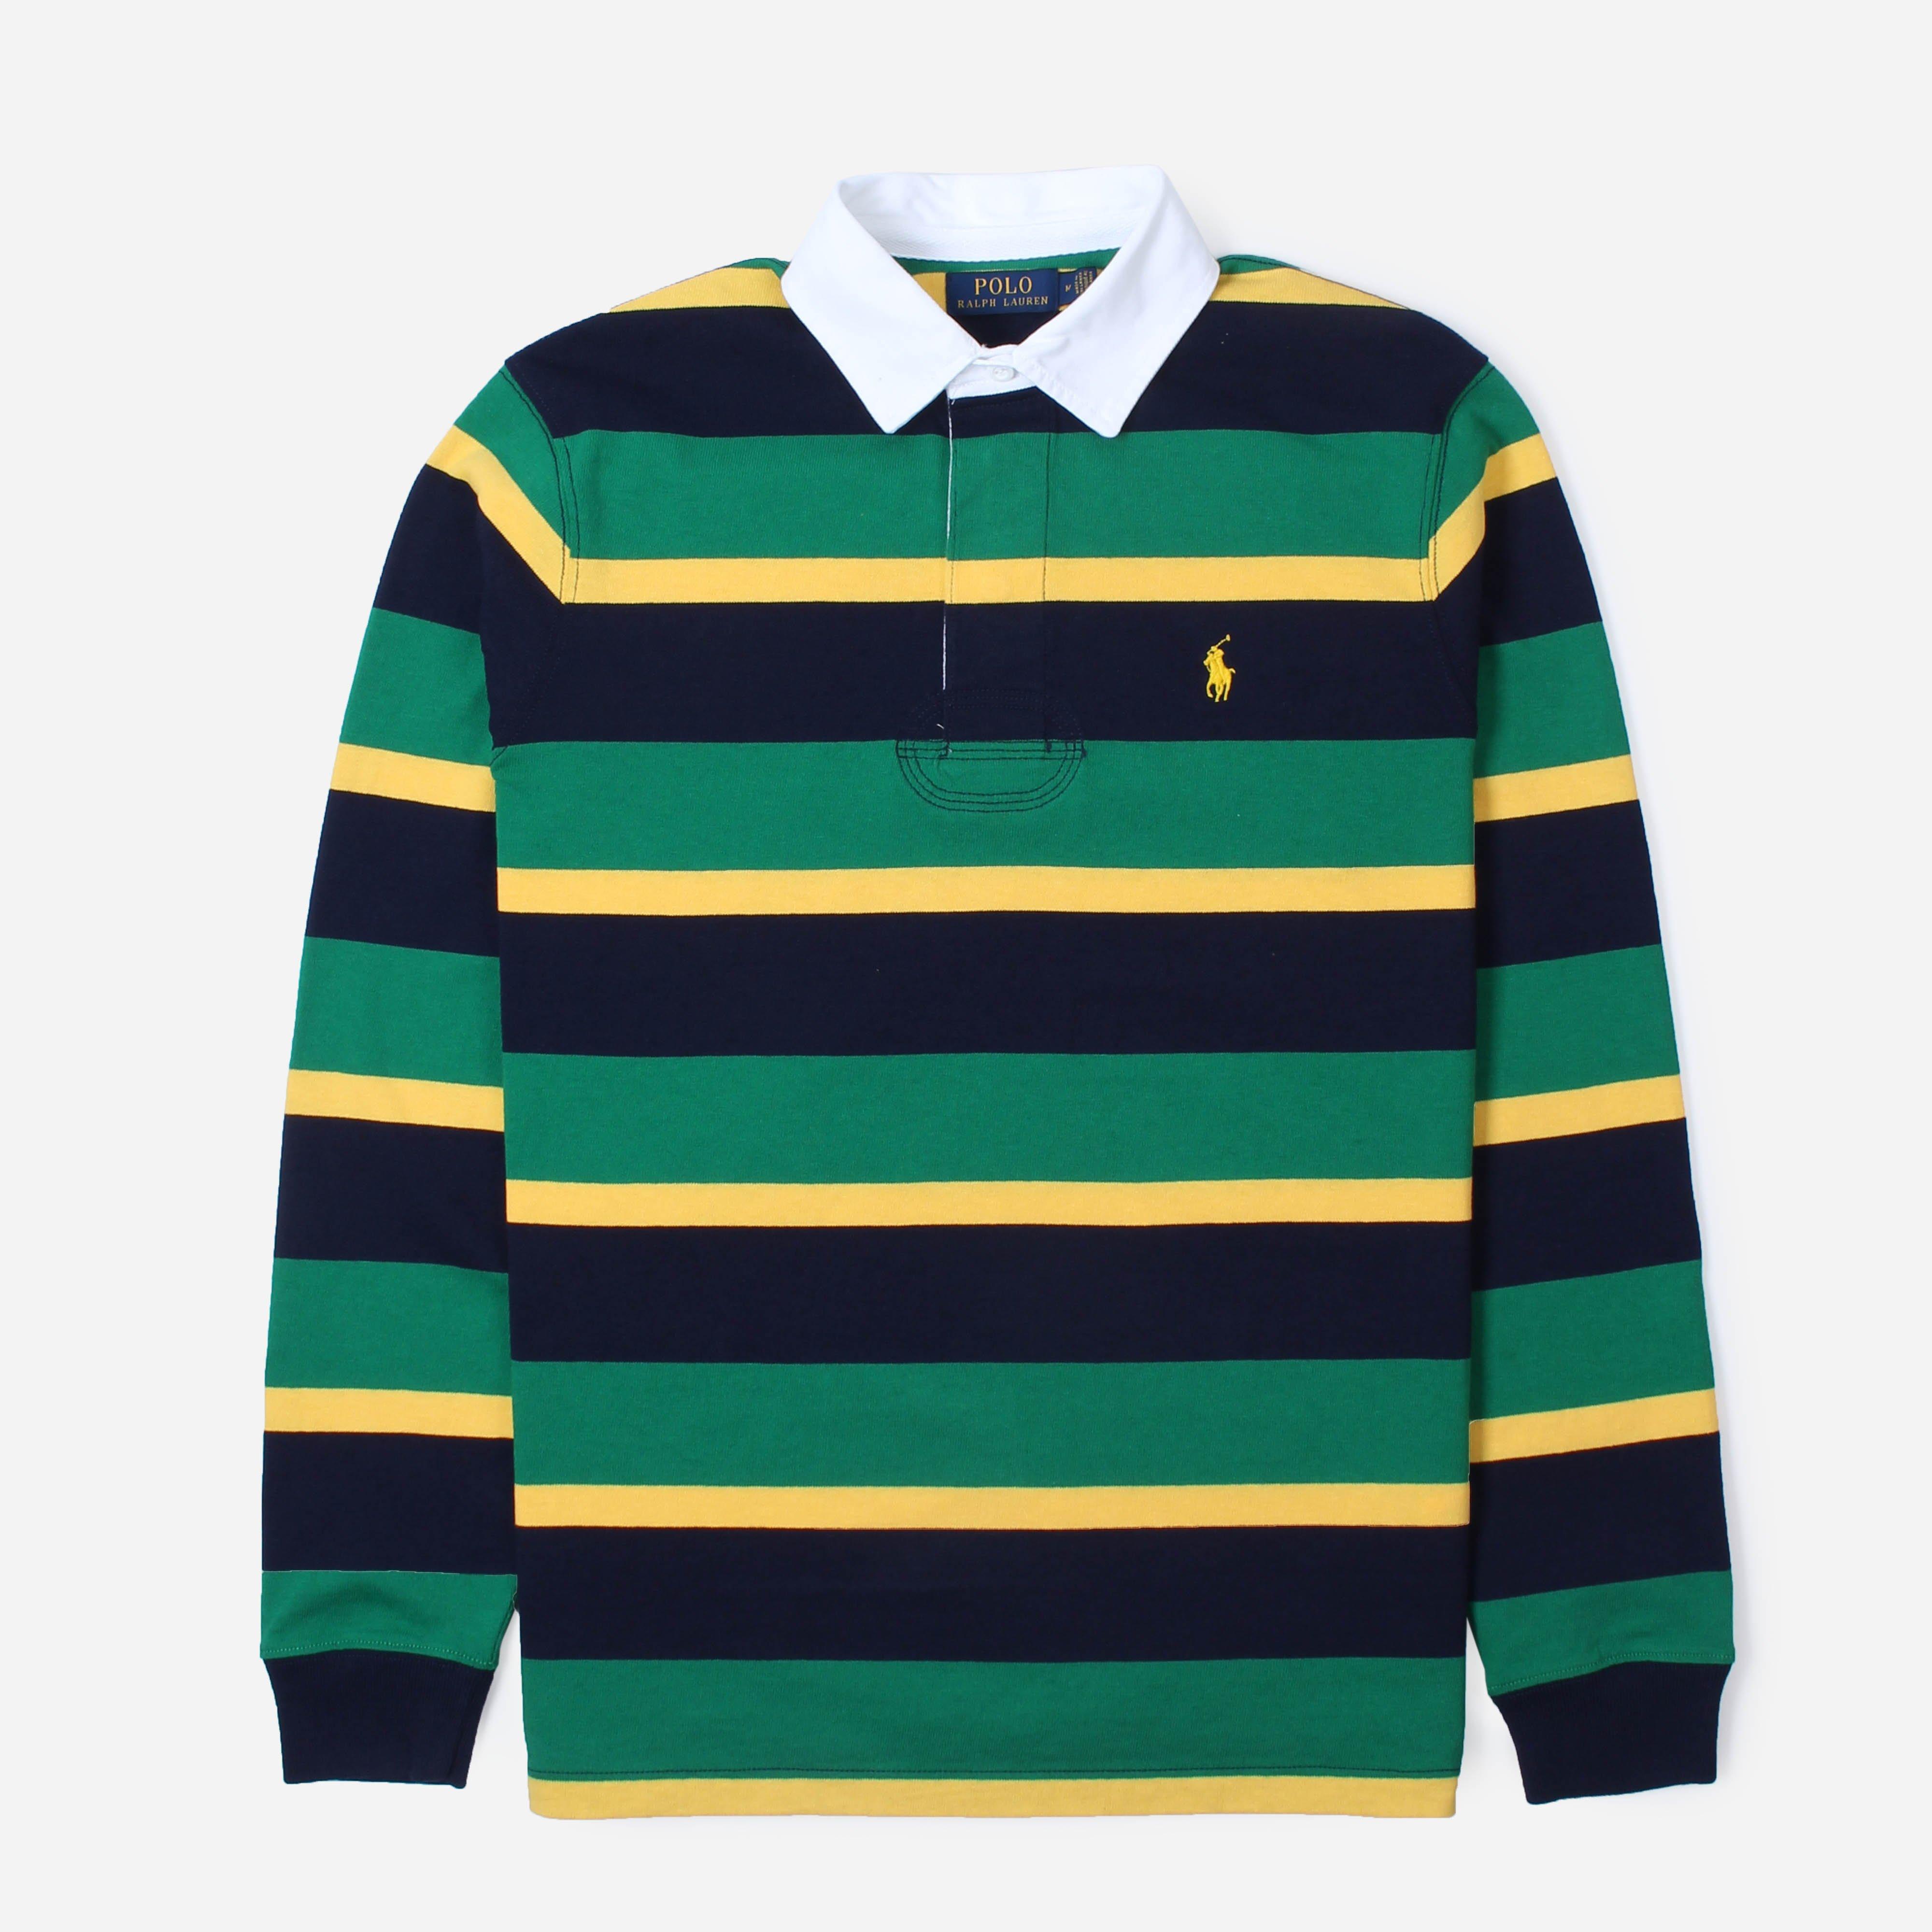 Lyst - Polo Ralph Lauren Rustic Rugby Polo Shirt in Green for Men